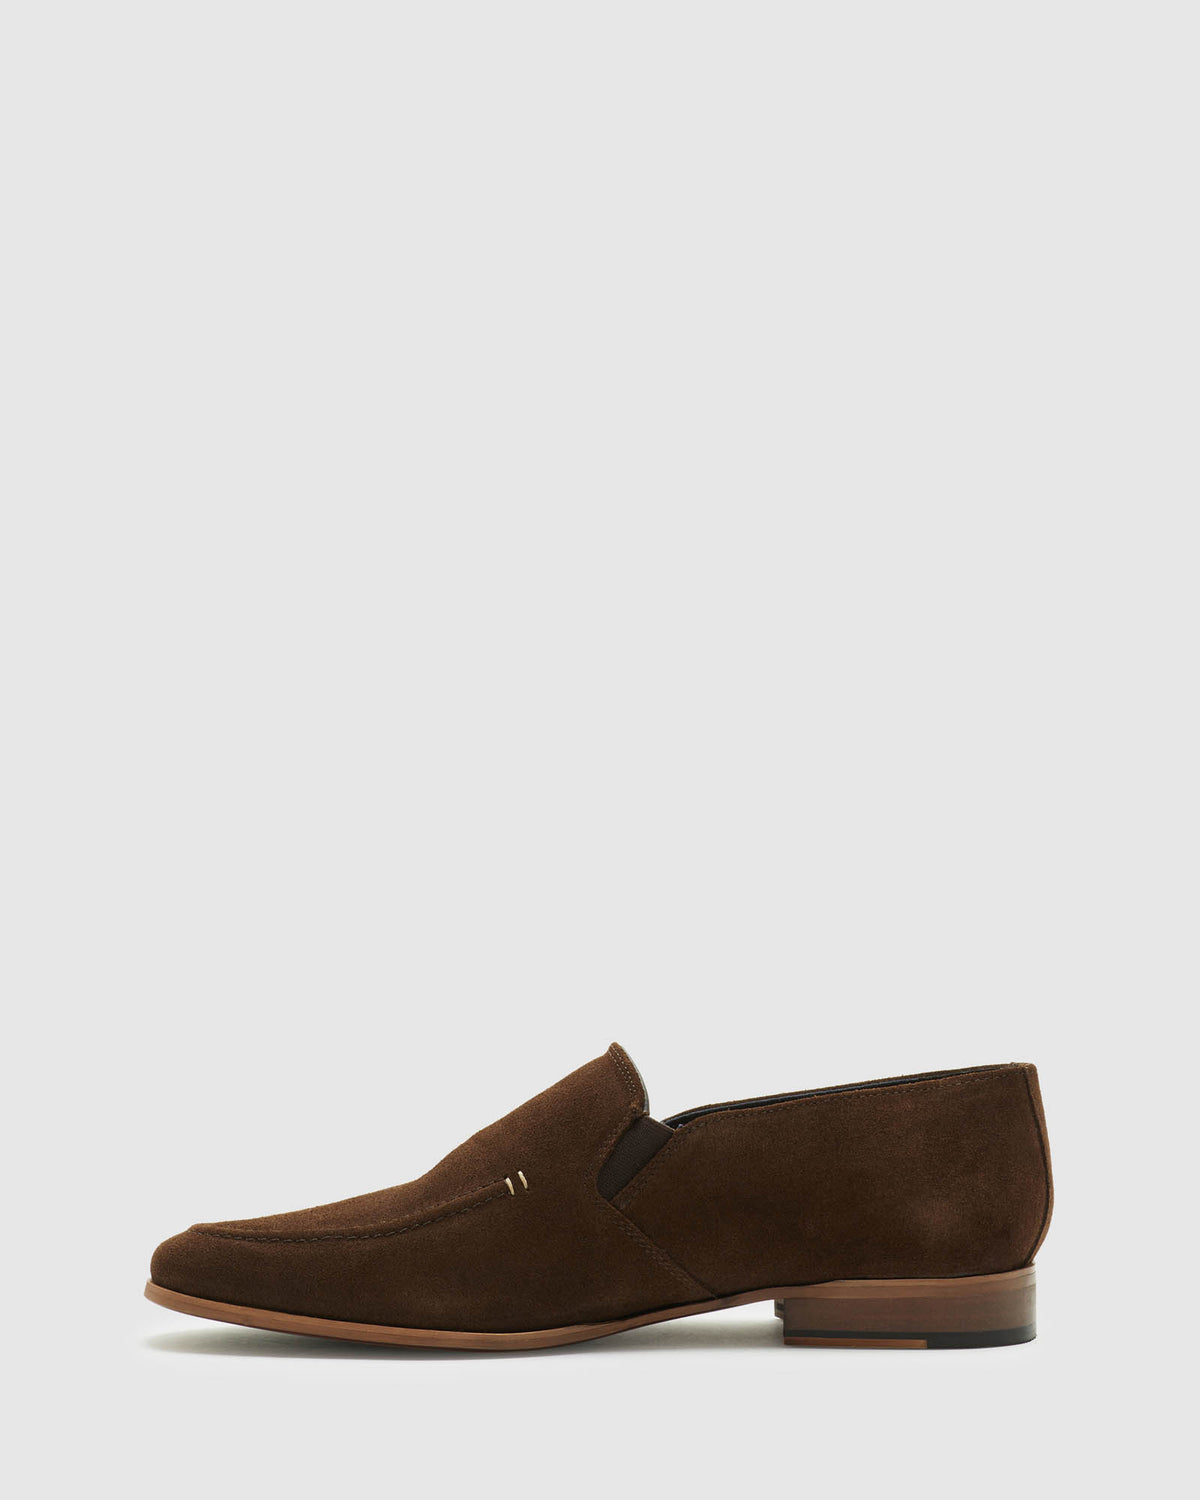 RUA SUEDE LEATHER LOAFERS MENS SHOES